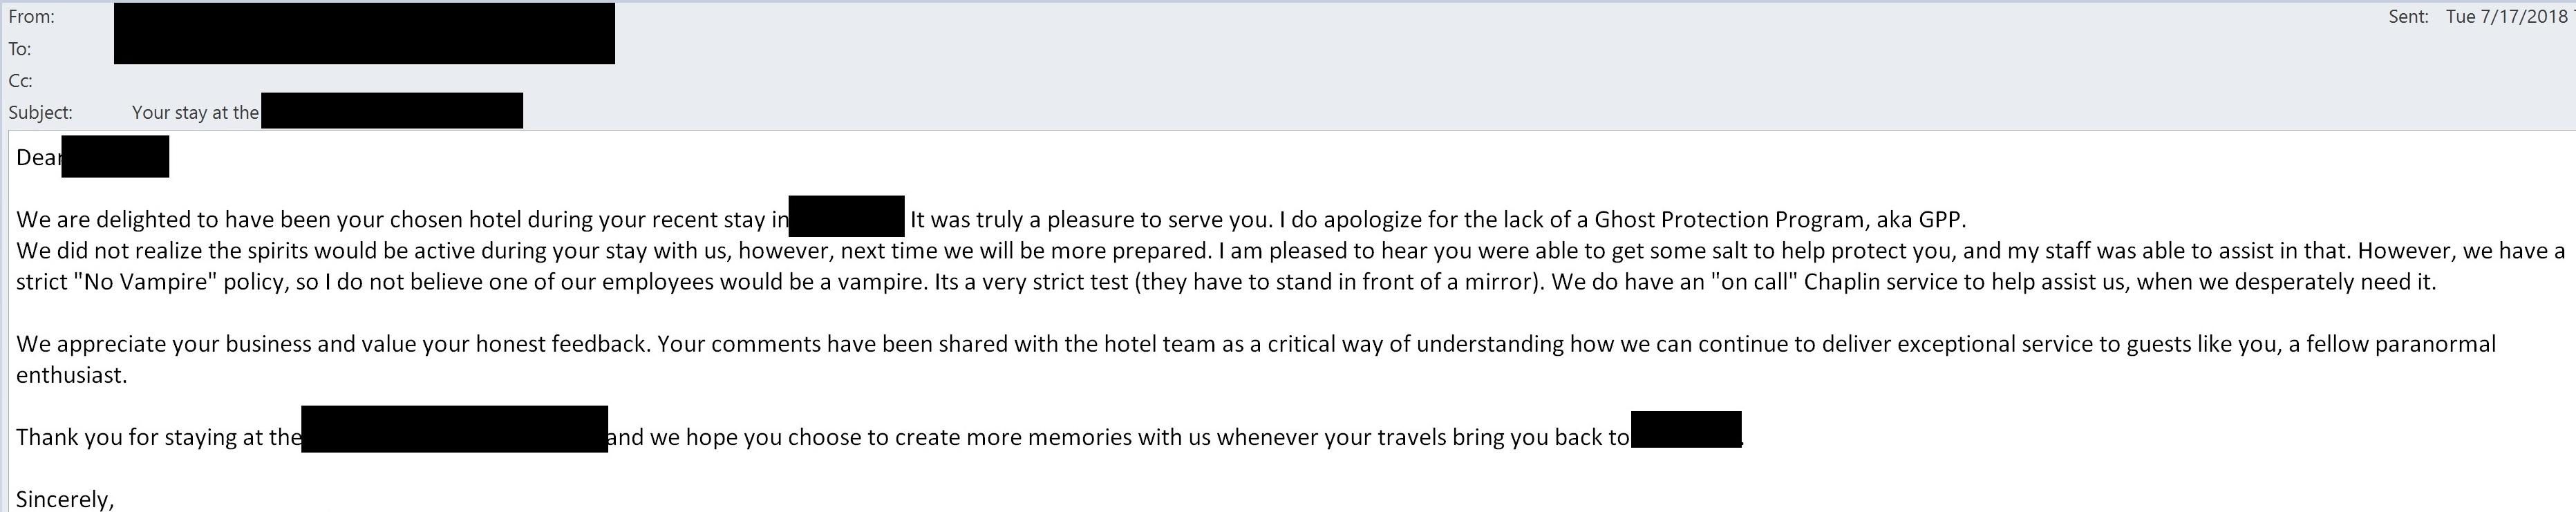 I got sick of a hotel asking me to do their survey, so I filled it out complaining about my room being haunted. This was their response